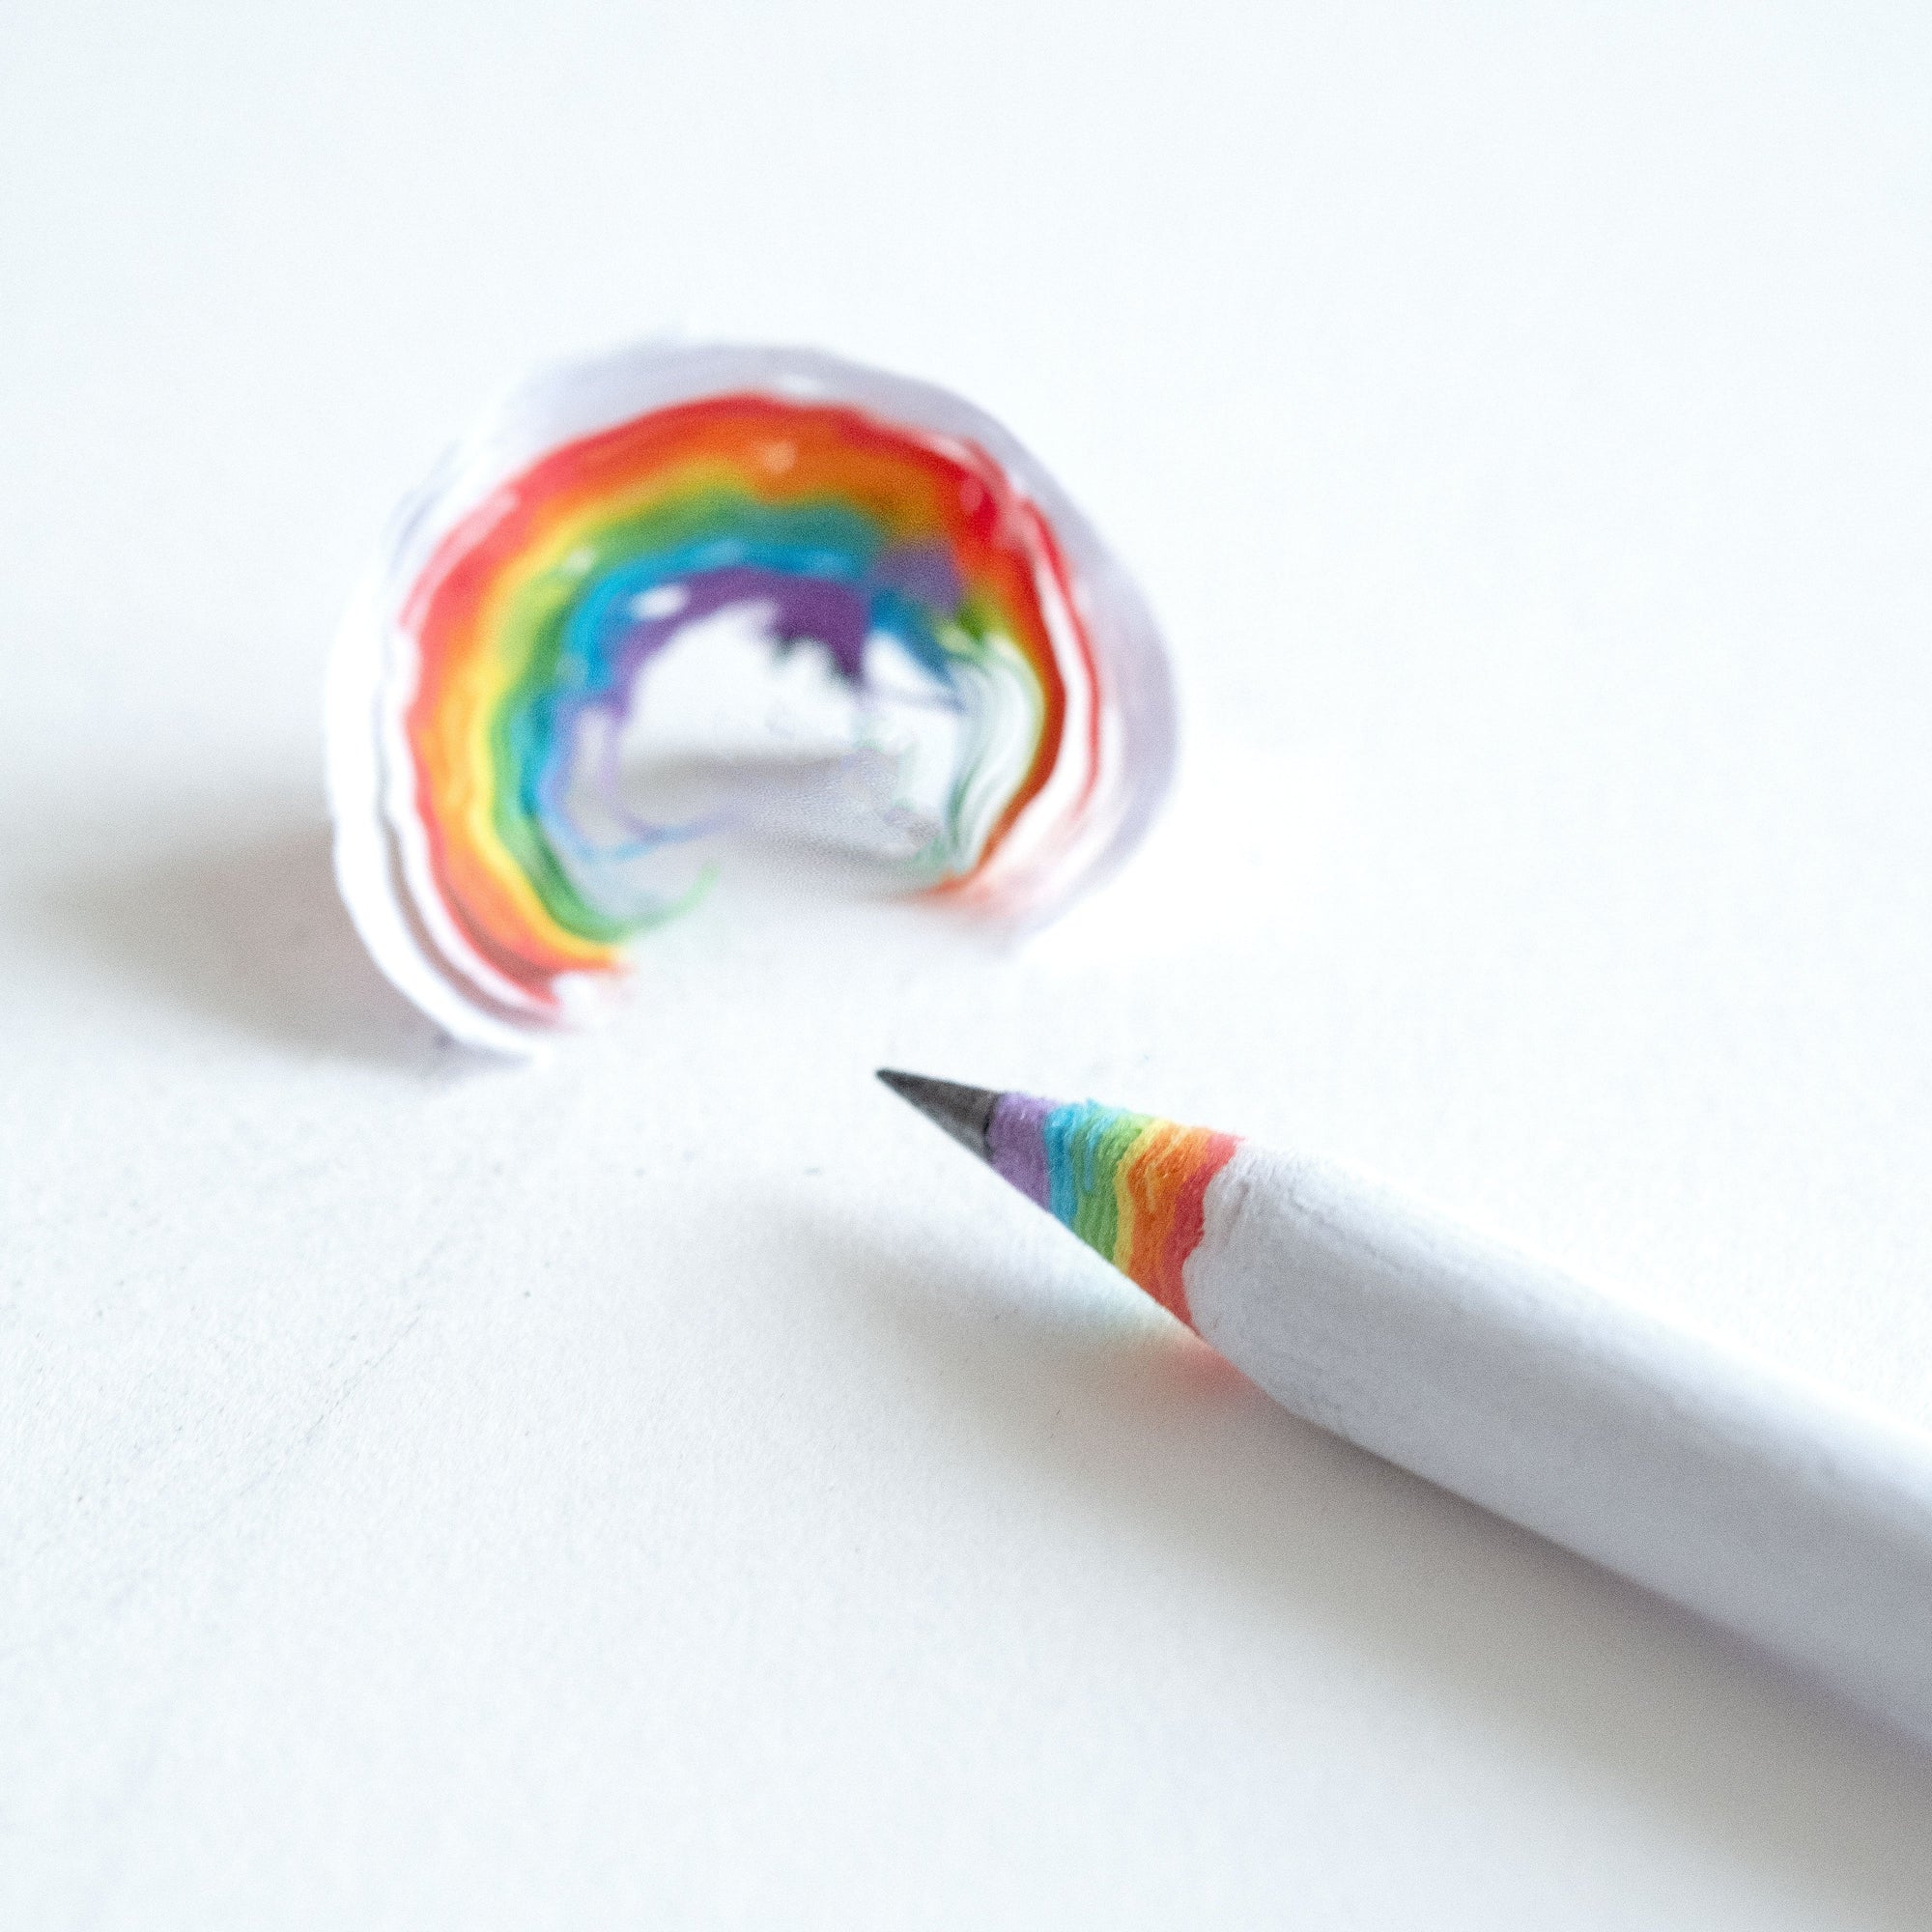 Rainbow pencil close up with a sharpened lead and a wood shaving fro the pencil showing the rainbow